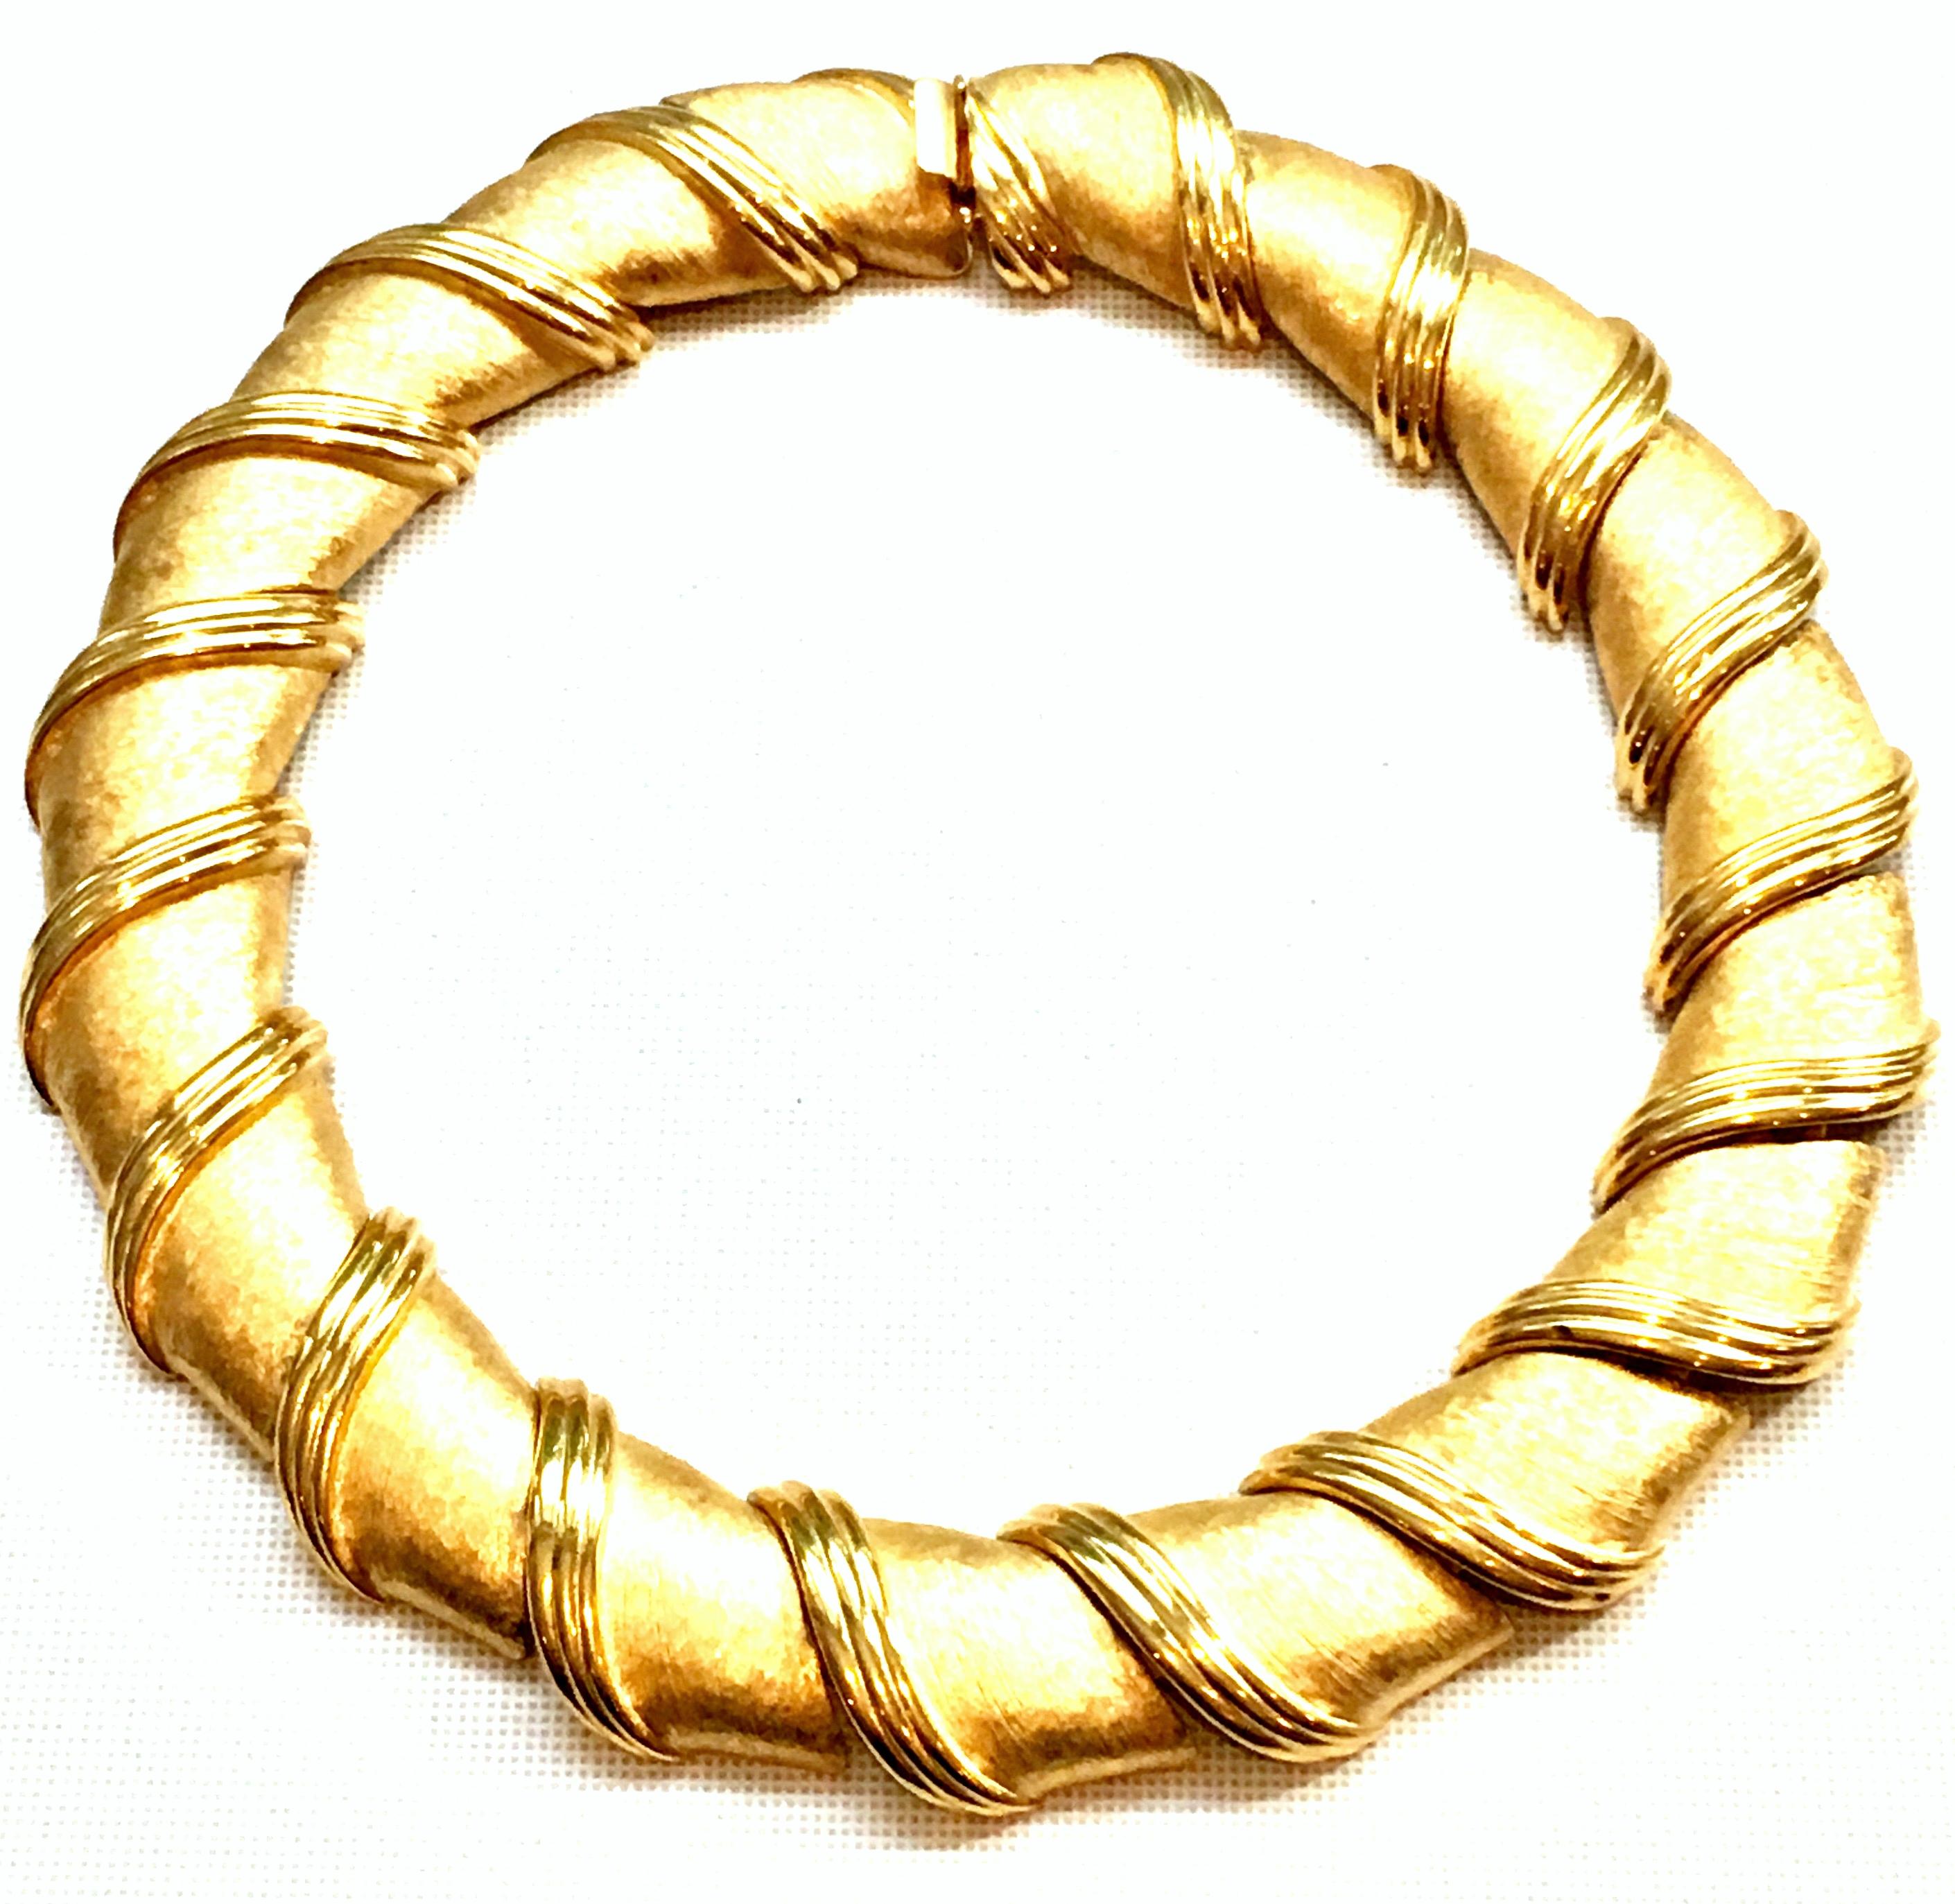 20th Century Gold Plate Curved Link Choker Necklace By, Kiam. Features chunky and substantial finely crafted brushed gold plate curved link with applied polished gold plate detail. Signed on the underside, Ellen Kiam. Each link is approximately,